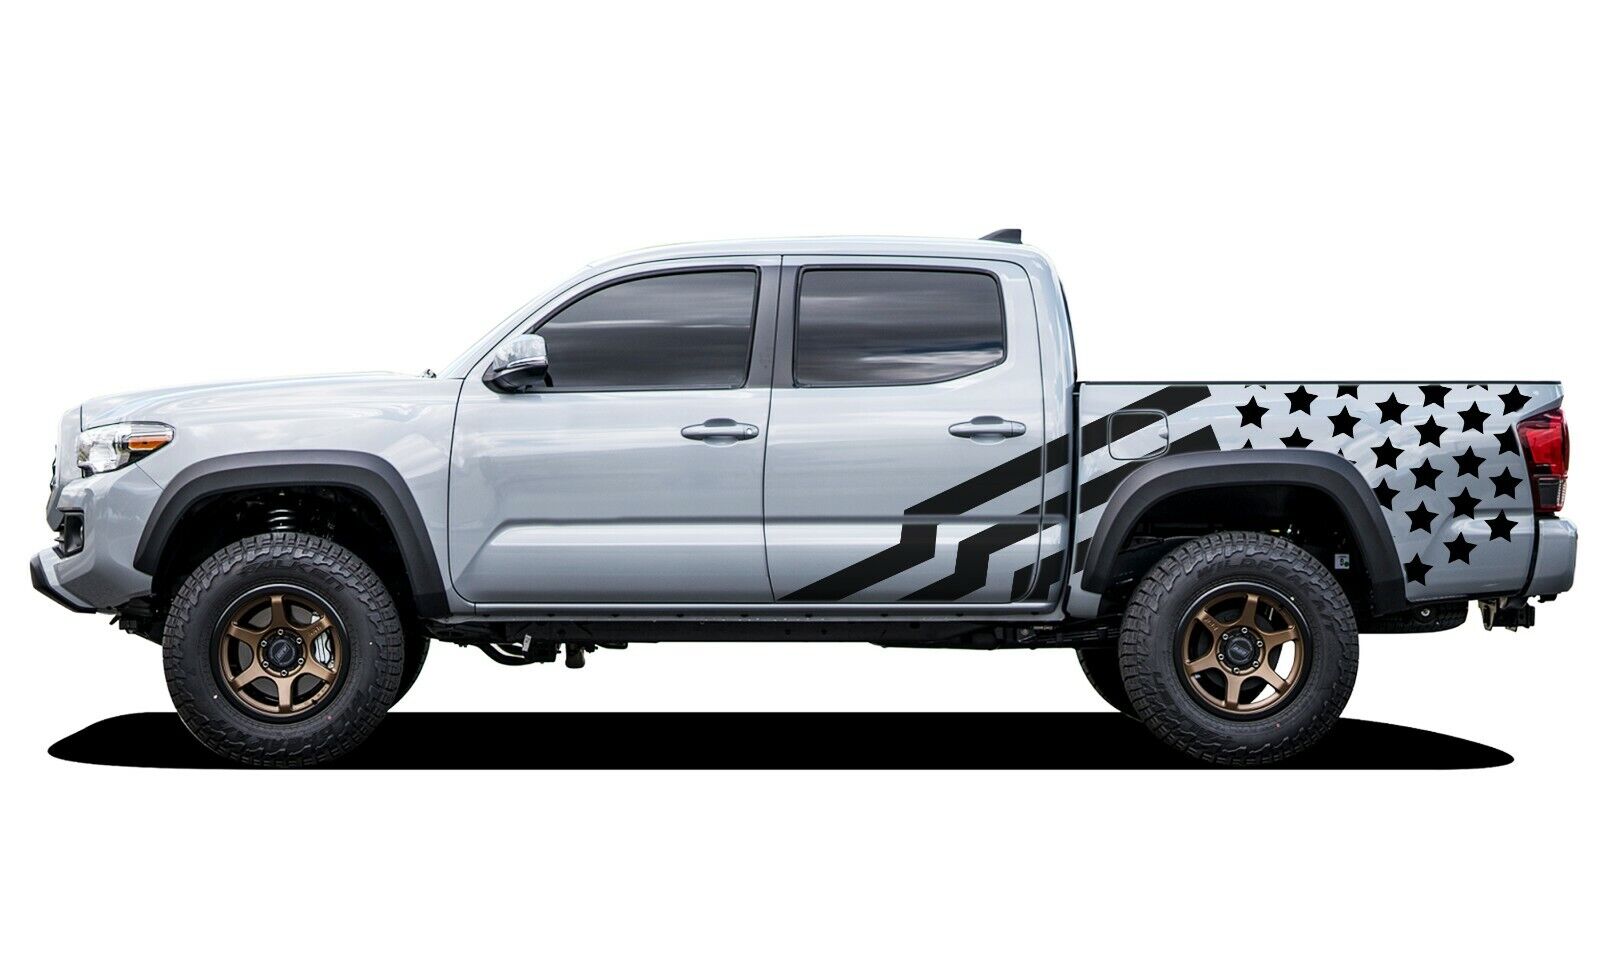 Decal Sticker For Toyota Tacoma Vinyl Graphic Stripe Body Kit Bed Off Road Sport